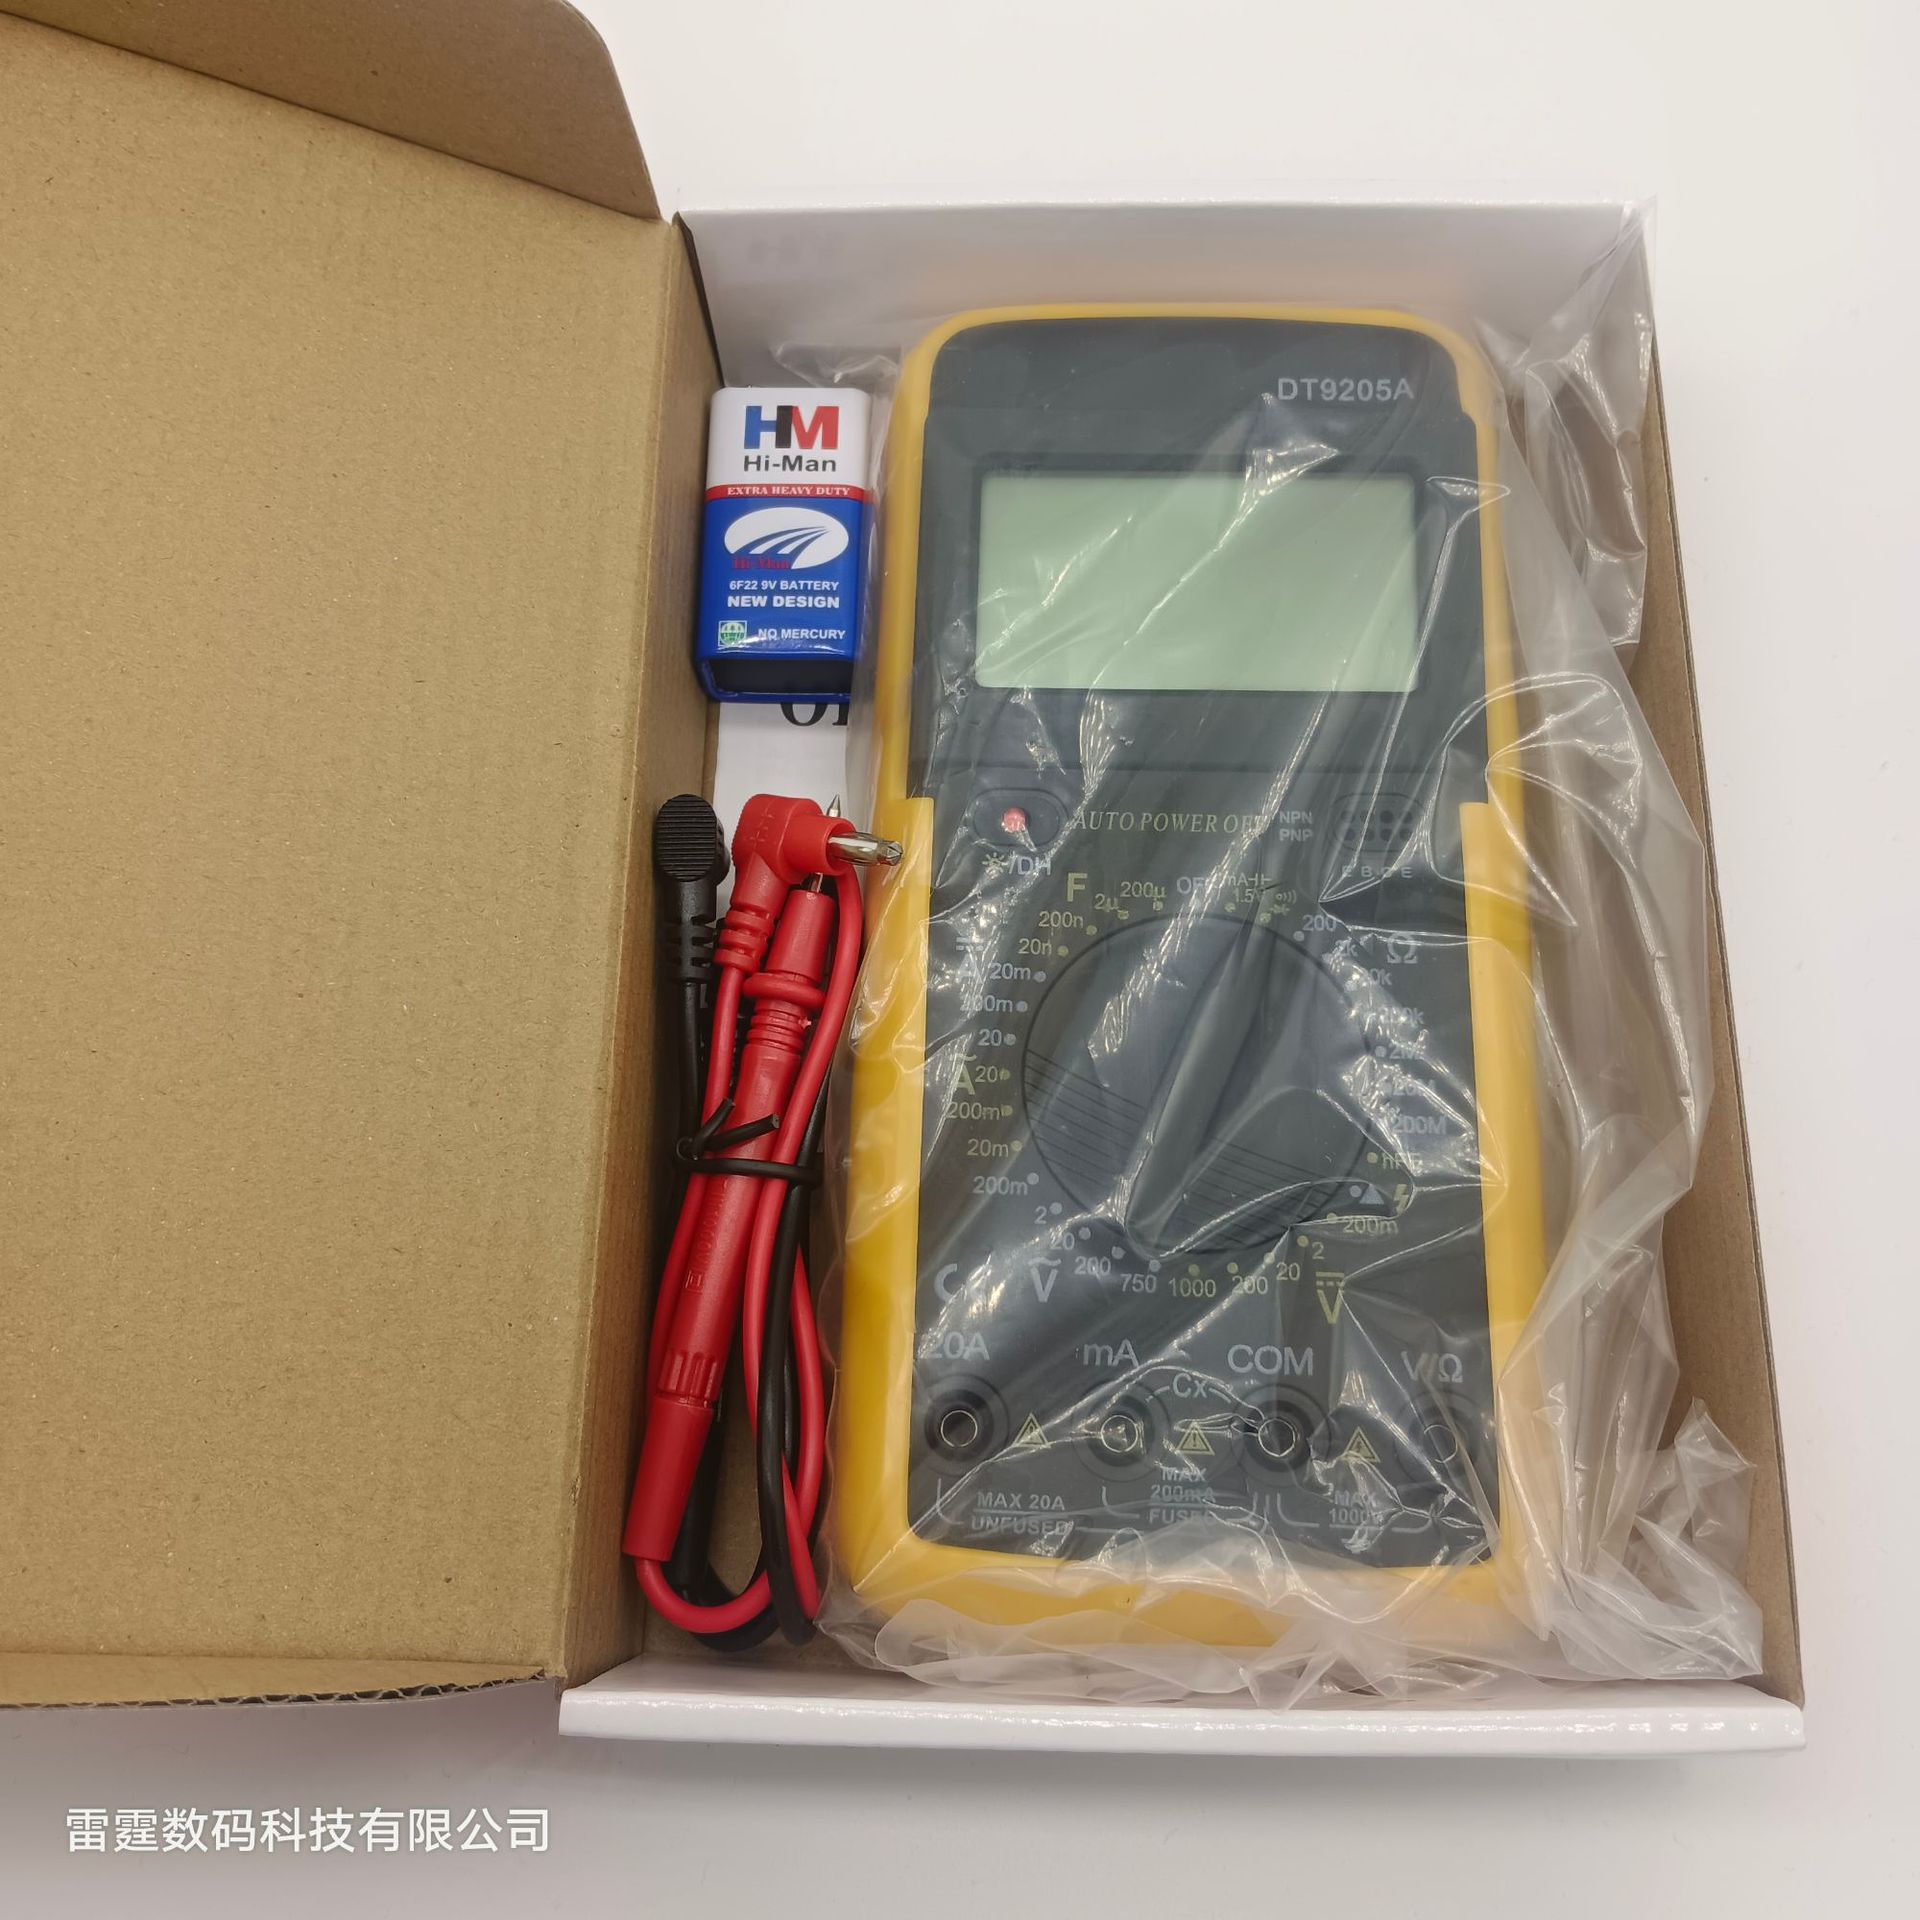 Dt9205a Multimeter High Precision Digital Display Electrical Instrument Pointer Multi-Function Digital Multimeter Digital Display